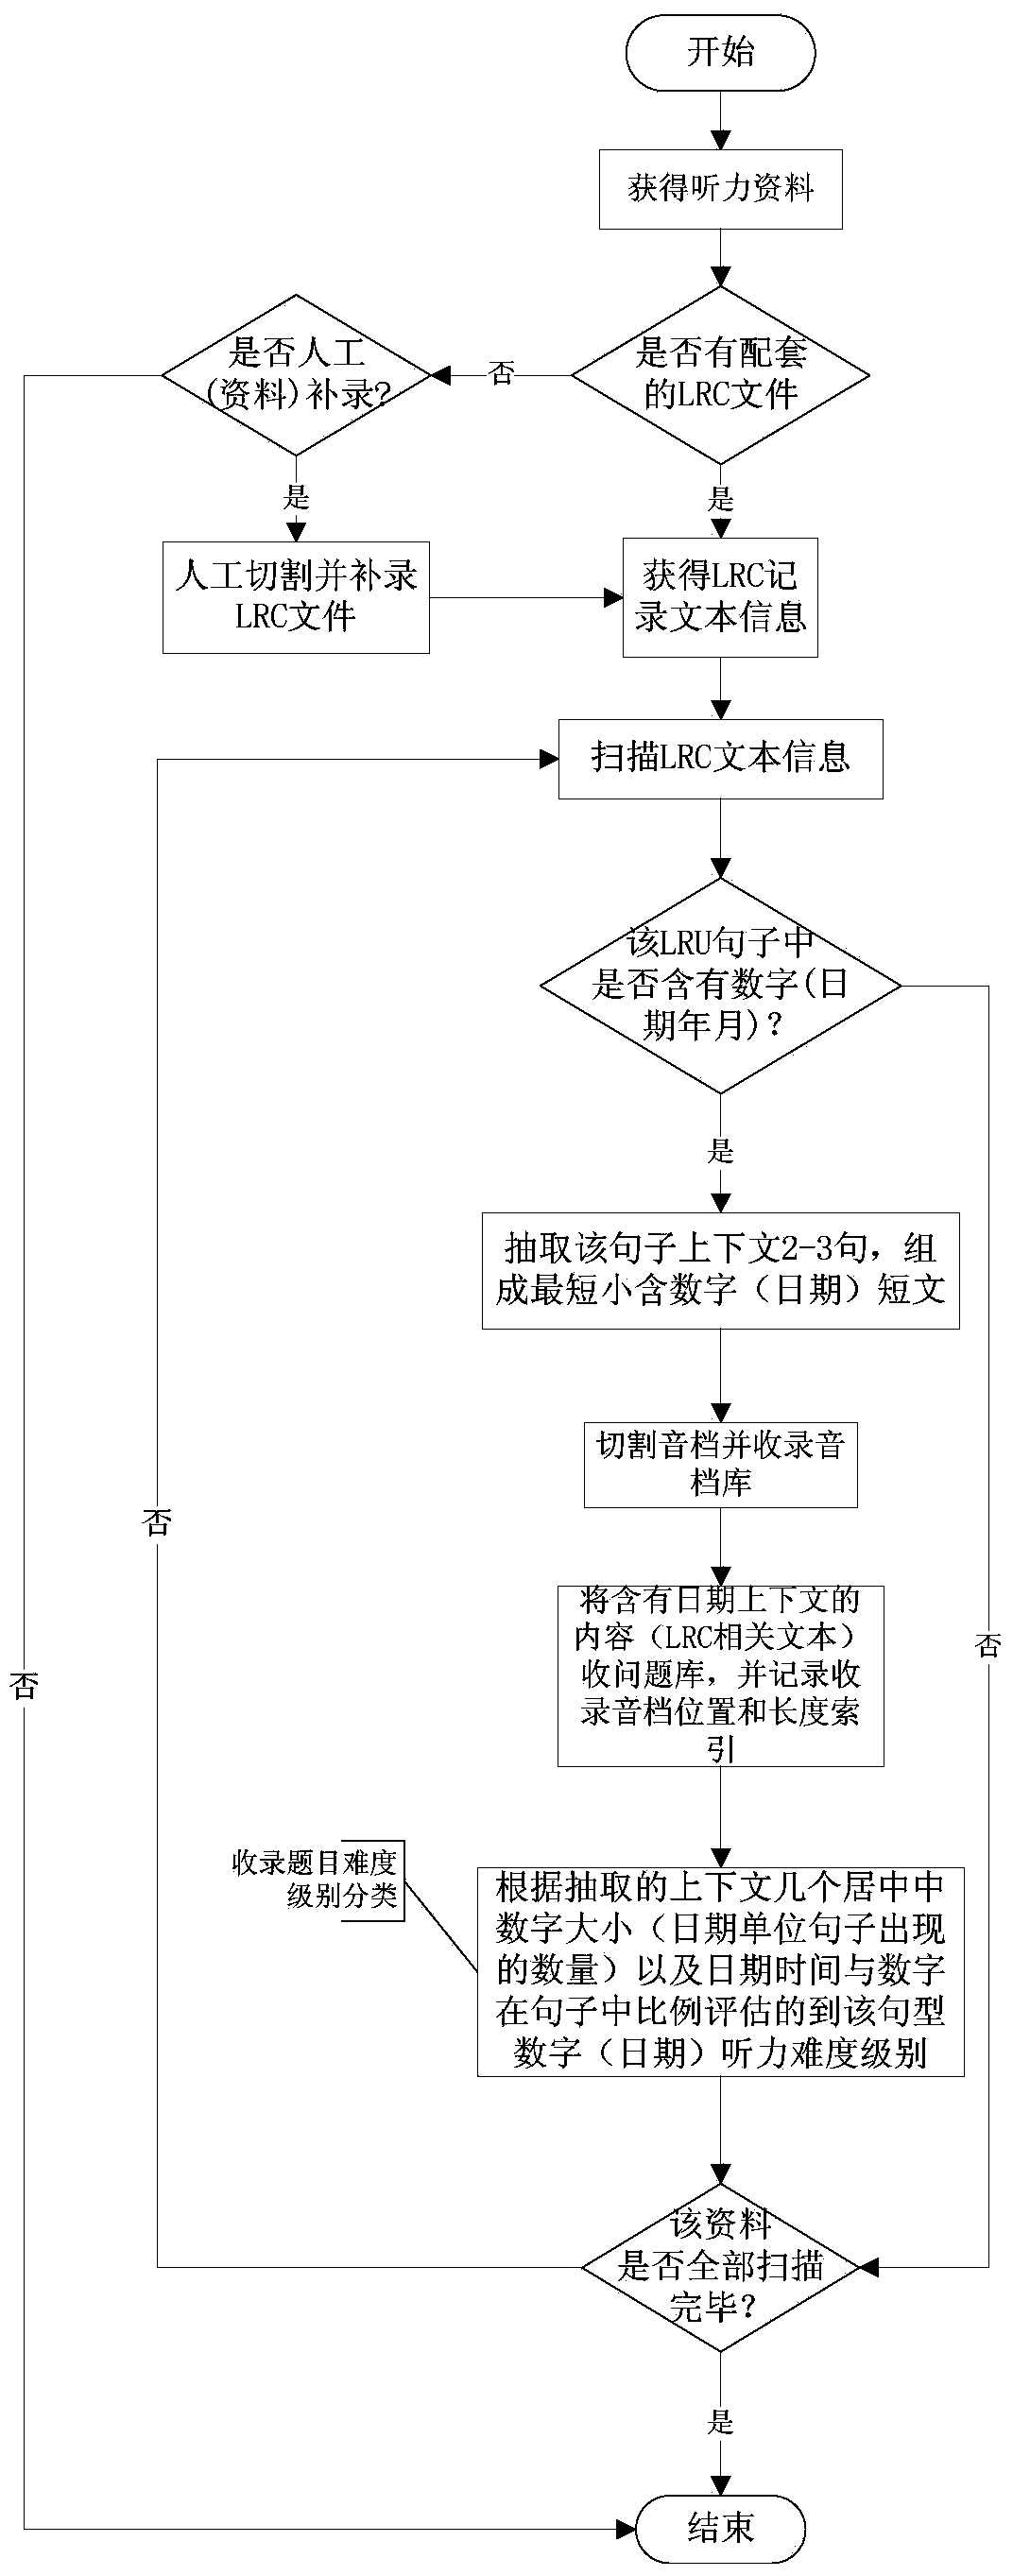 System and method for special dictation training study related to numbers in foreign language